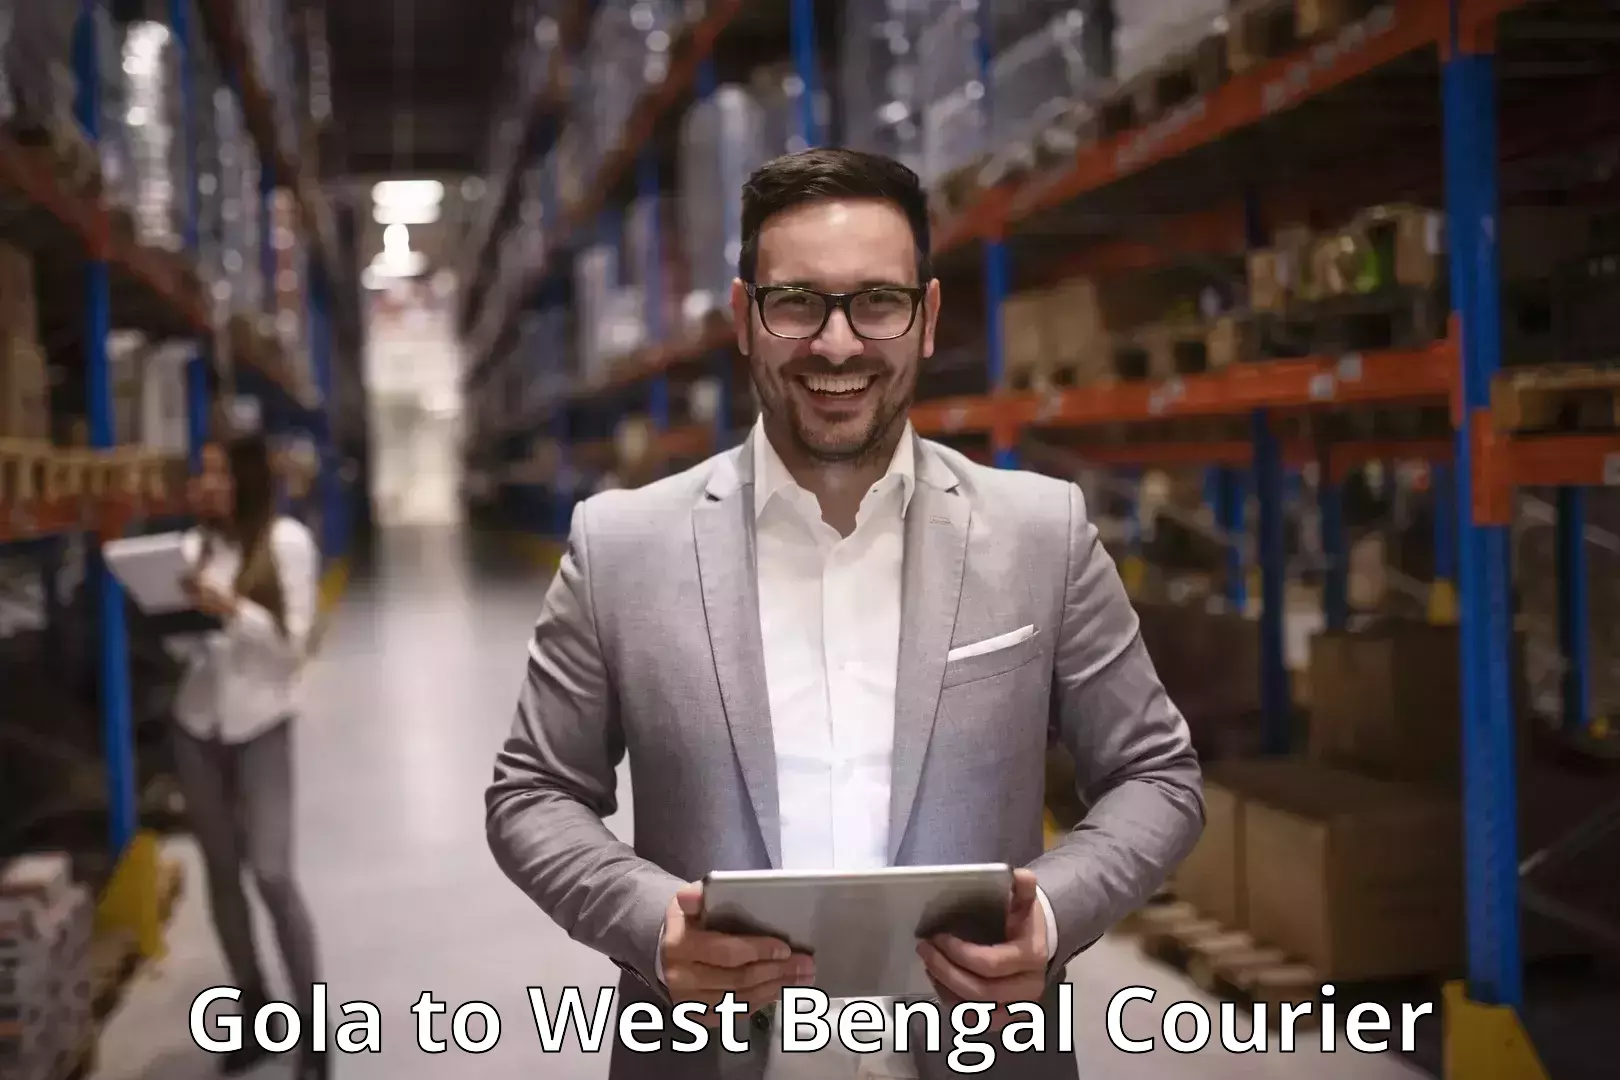 Courier app Gola to West Bengal